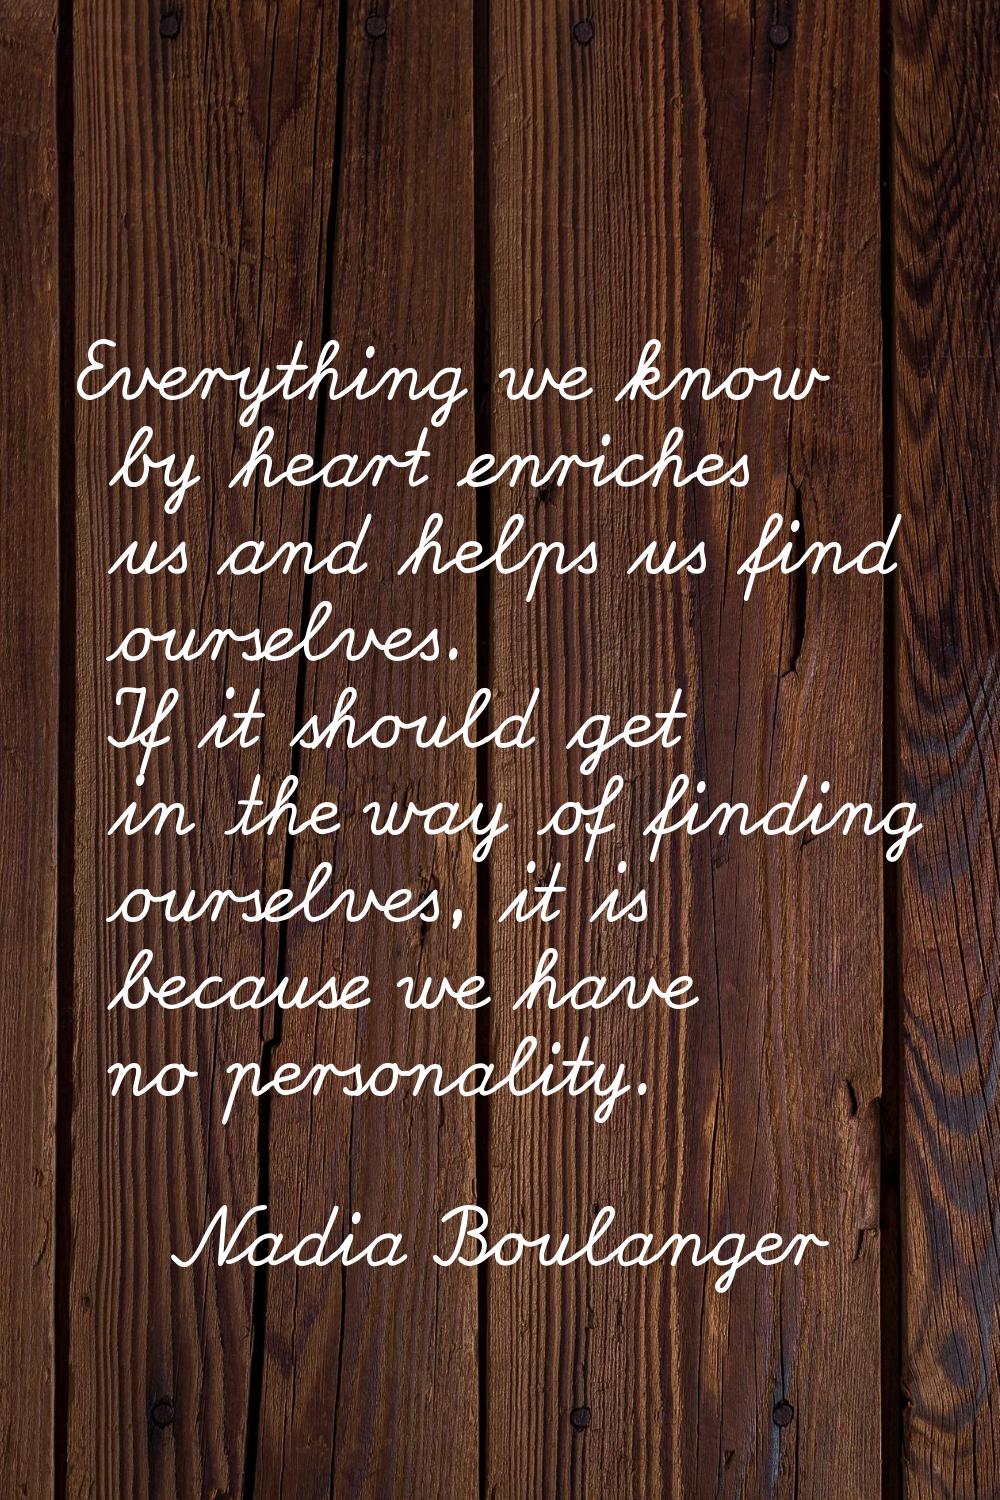 Everything we know by heart enriches us and helps us find ourselves. If it should get in the way of